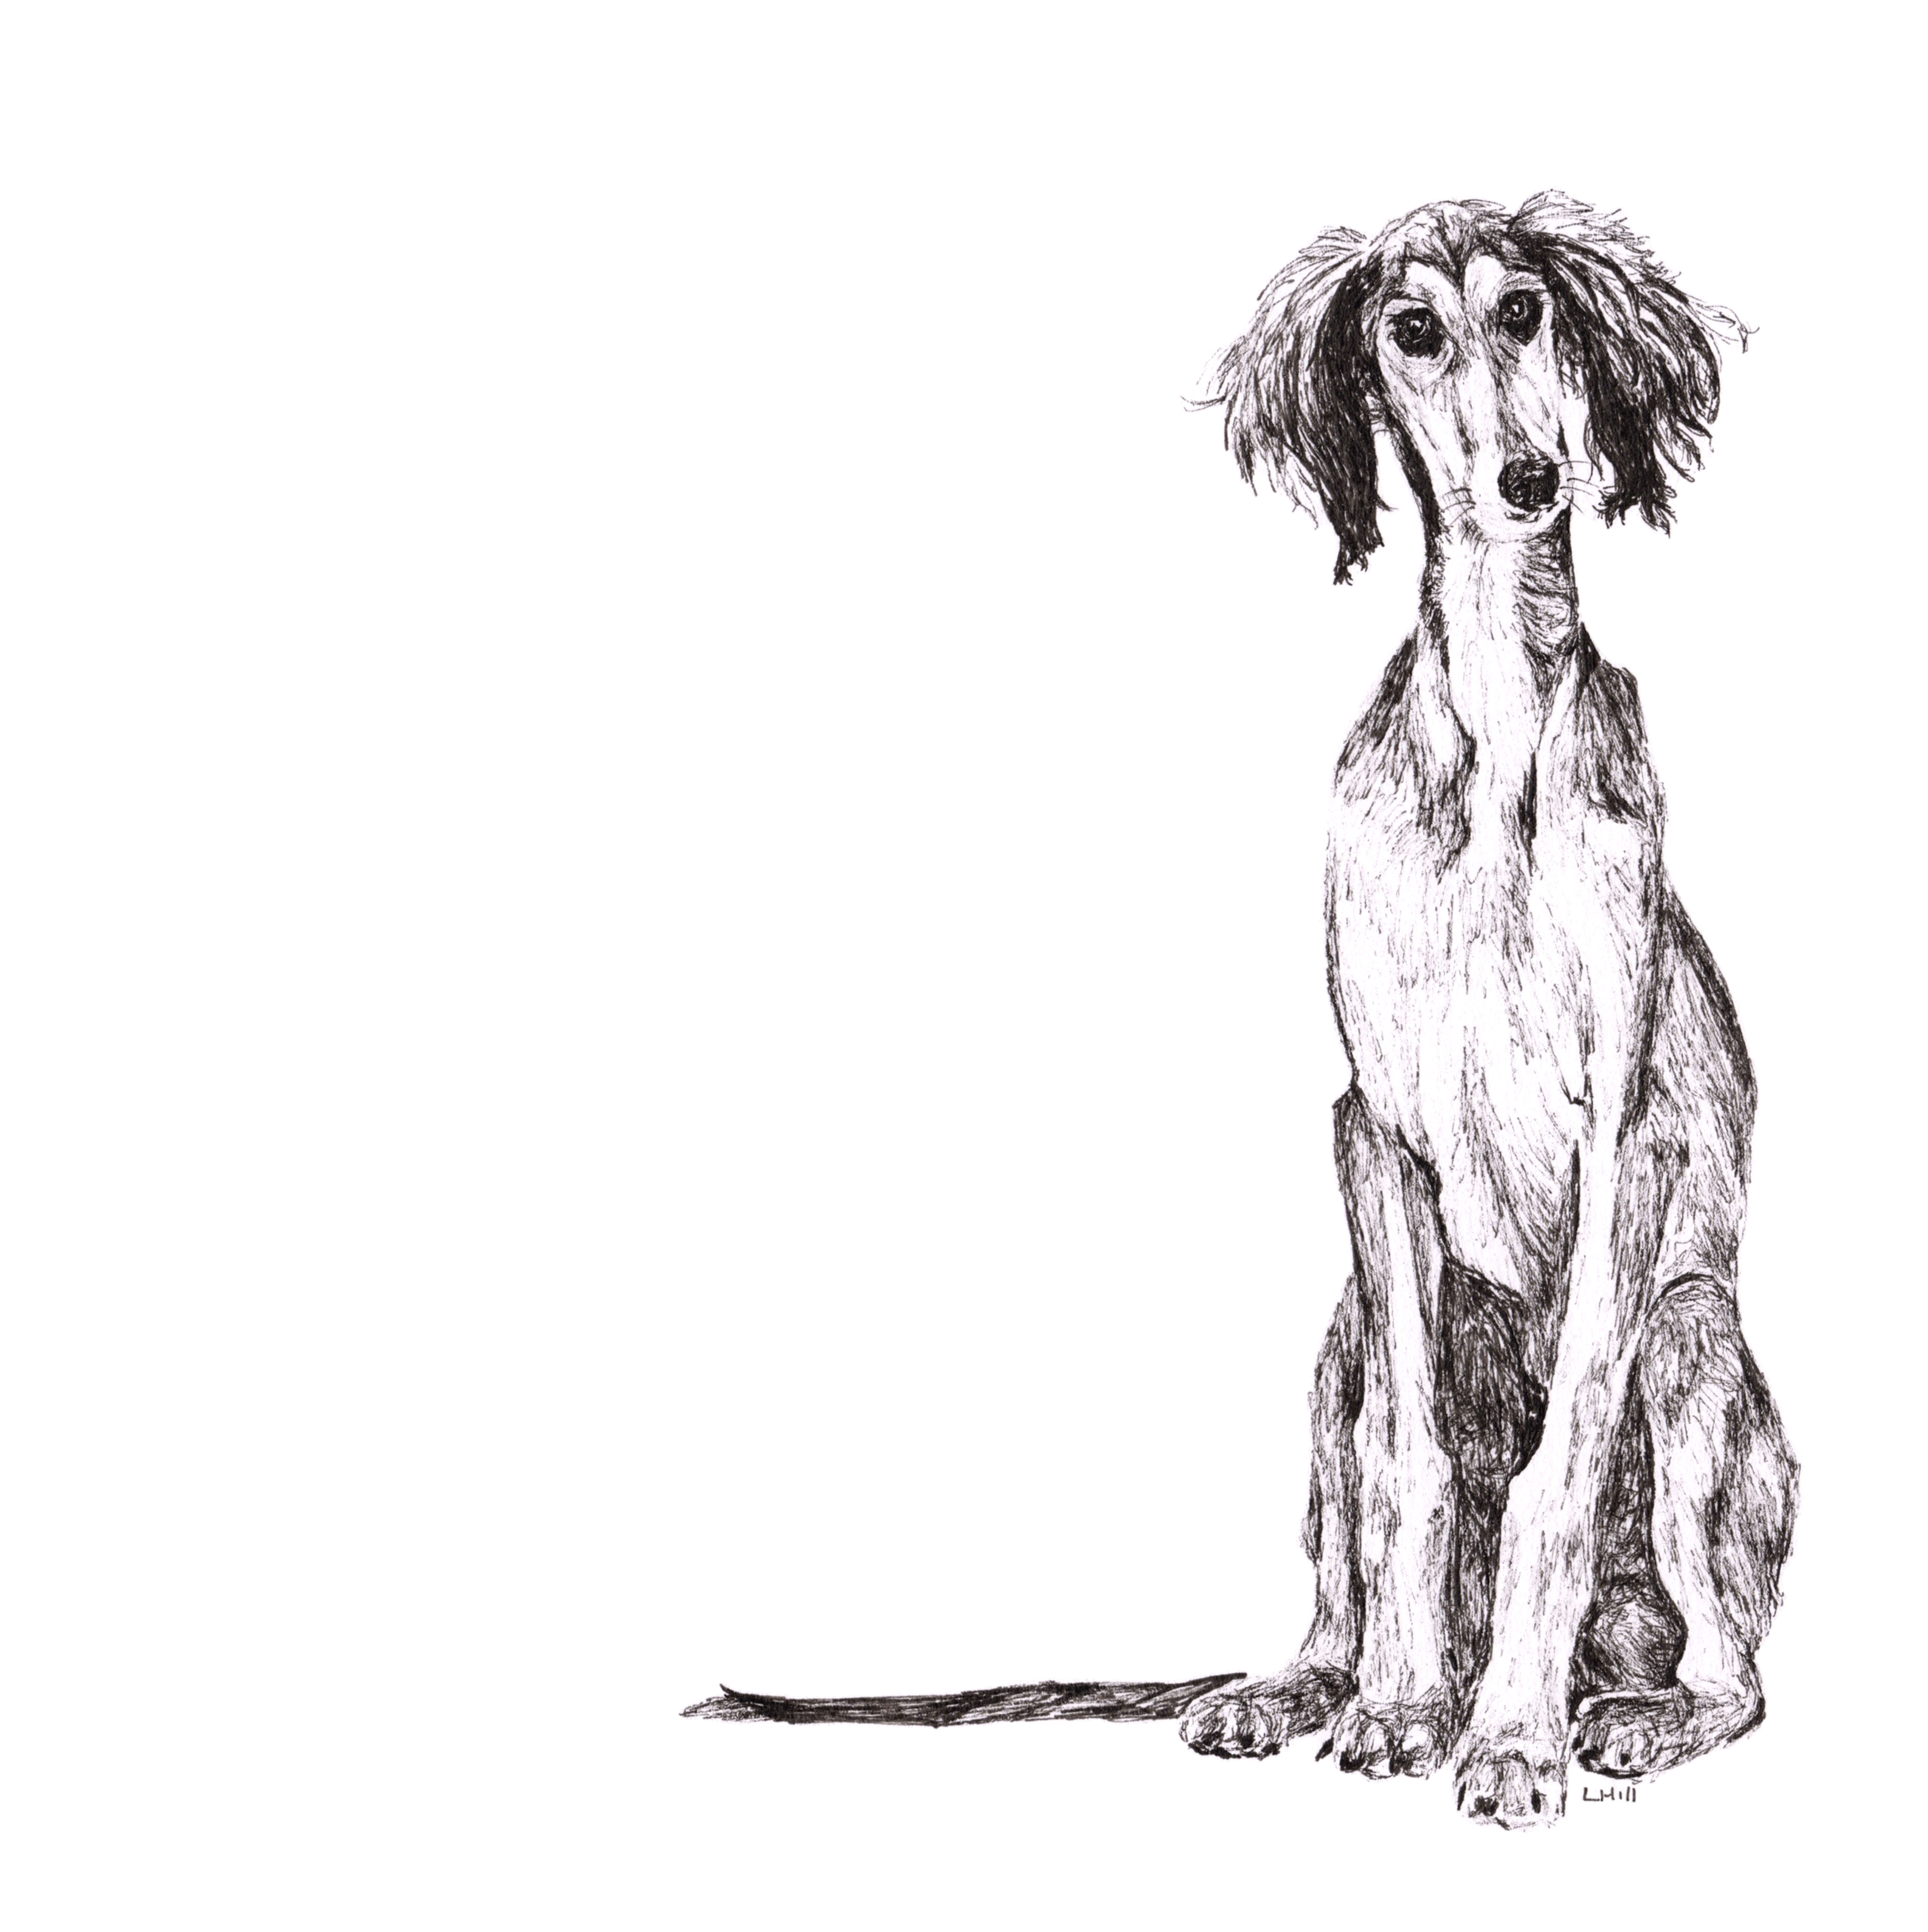 Saluki pen and ink illustration by Louisa Hill